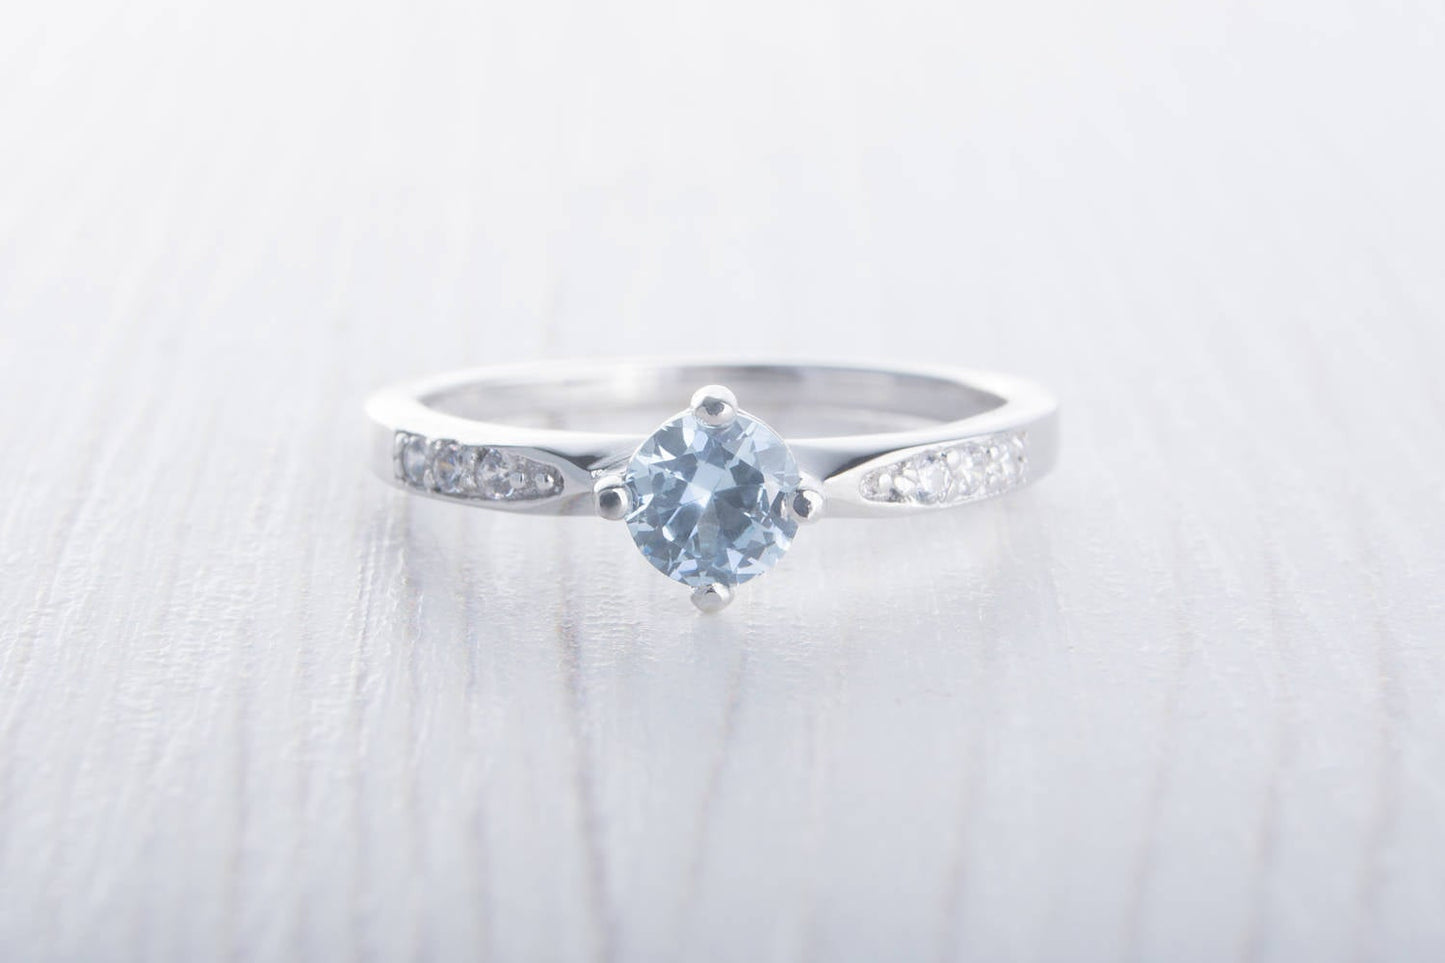 Genuine aquamarine Solitaire engagement ring - Available in white gold and sterling silver - handmade engagement ring - wedding ring